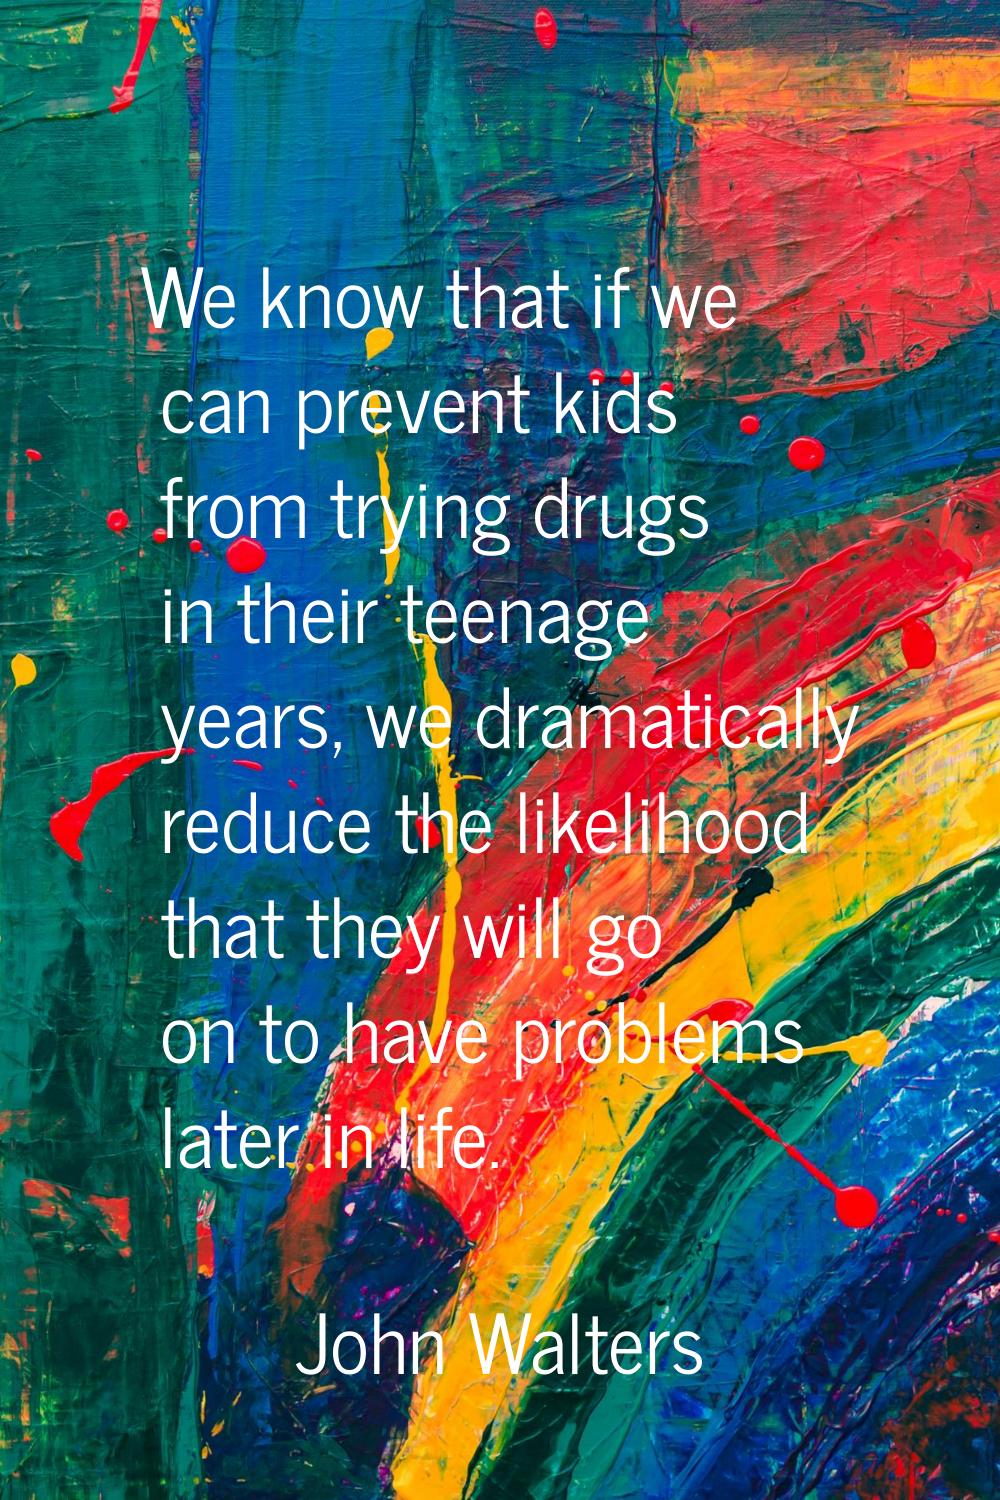 We know that if we can prevent kids from trying drugs in their teenage years, we dramatically reduc